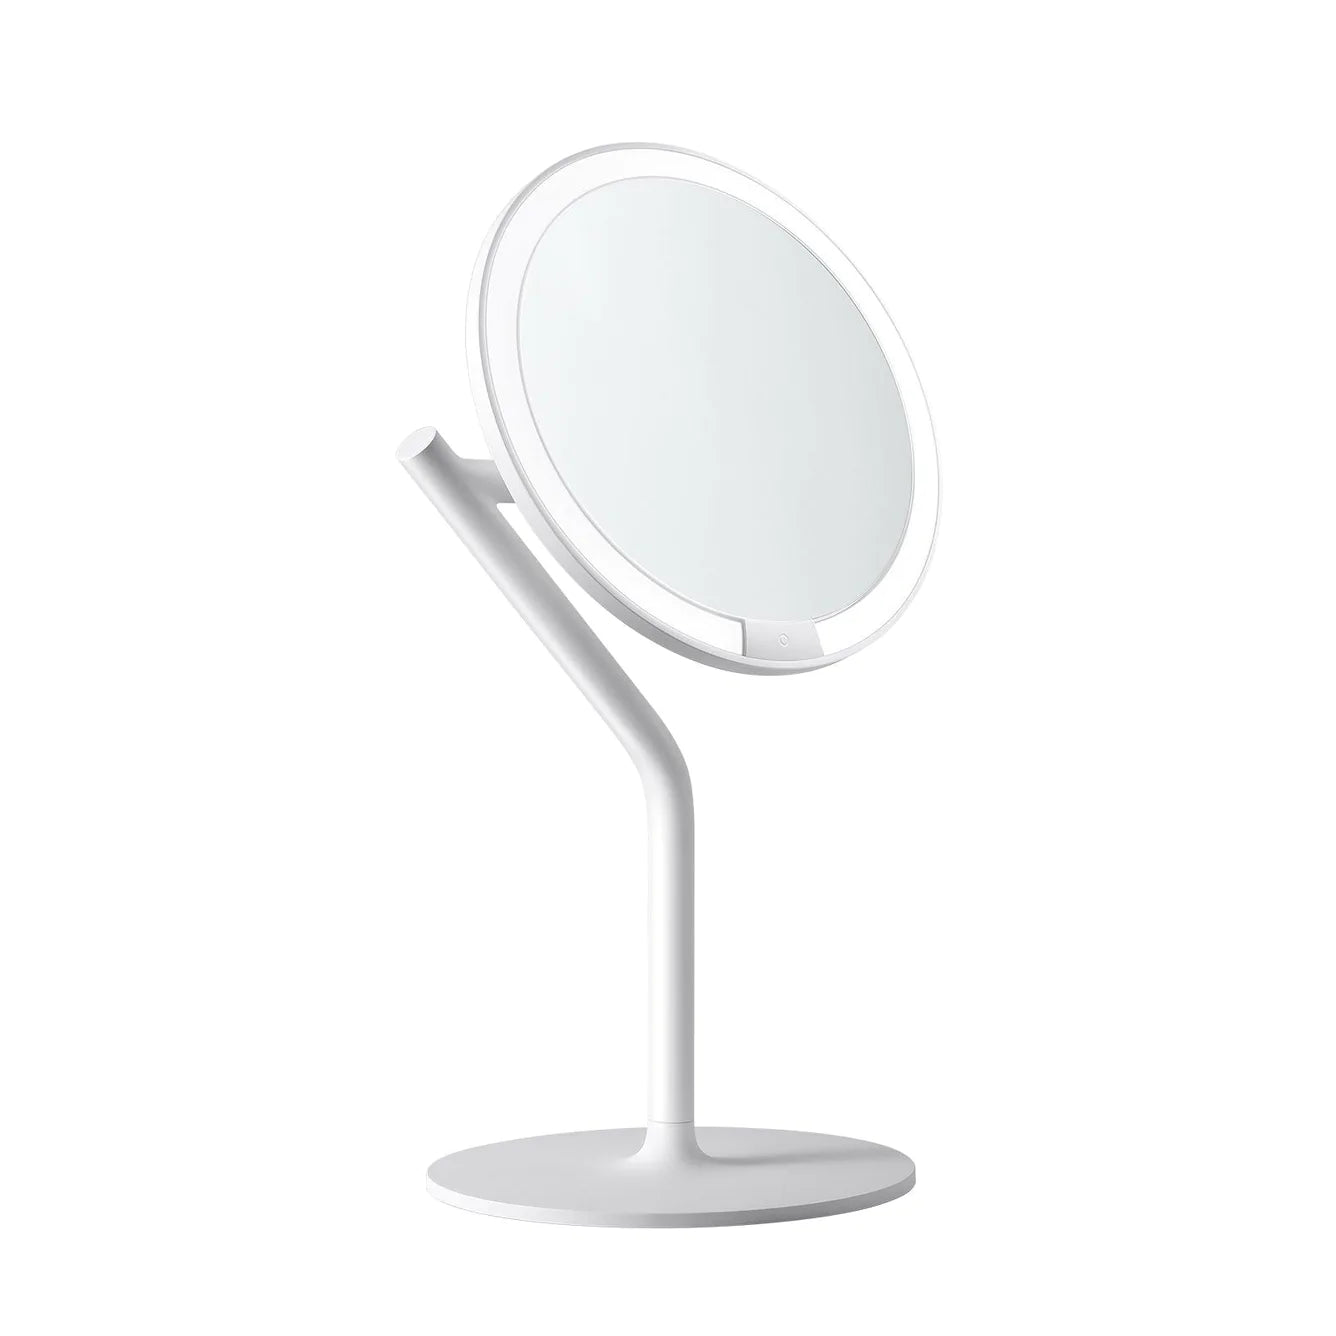 Best Desk LED Makeup Mirror for Travelers: Your Perfect Match for Effortless Beauty